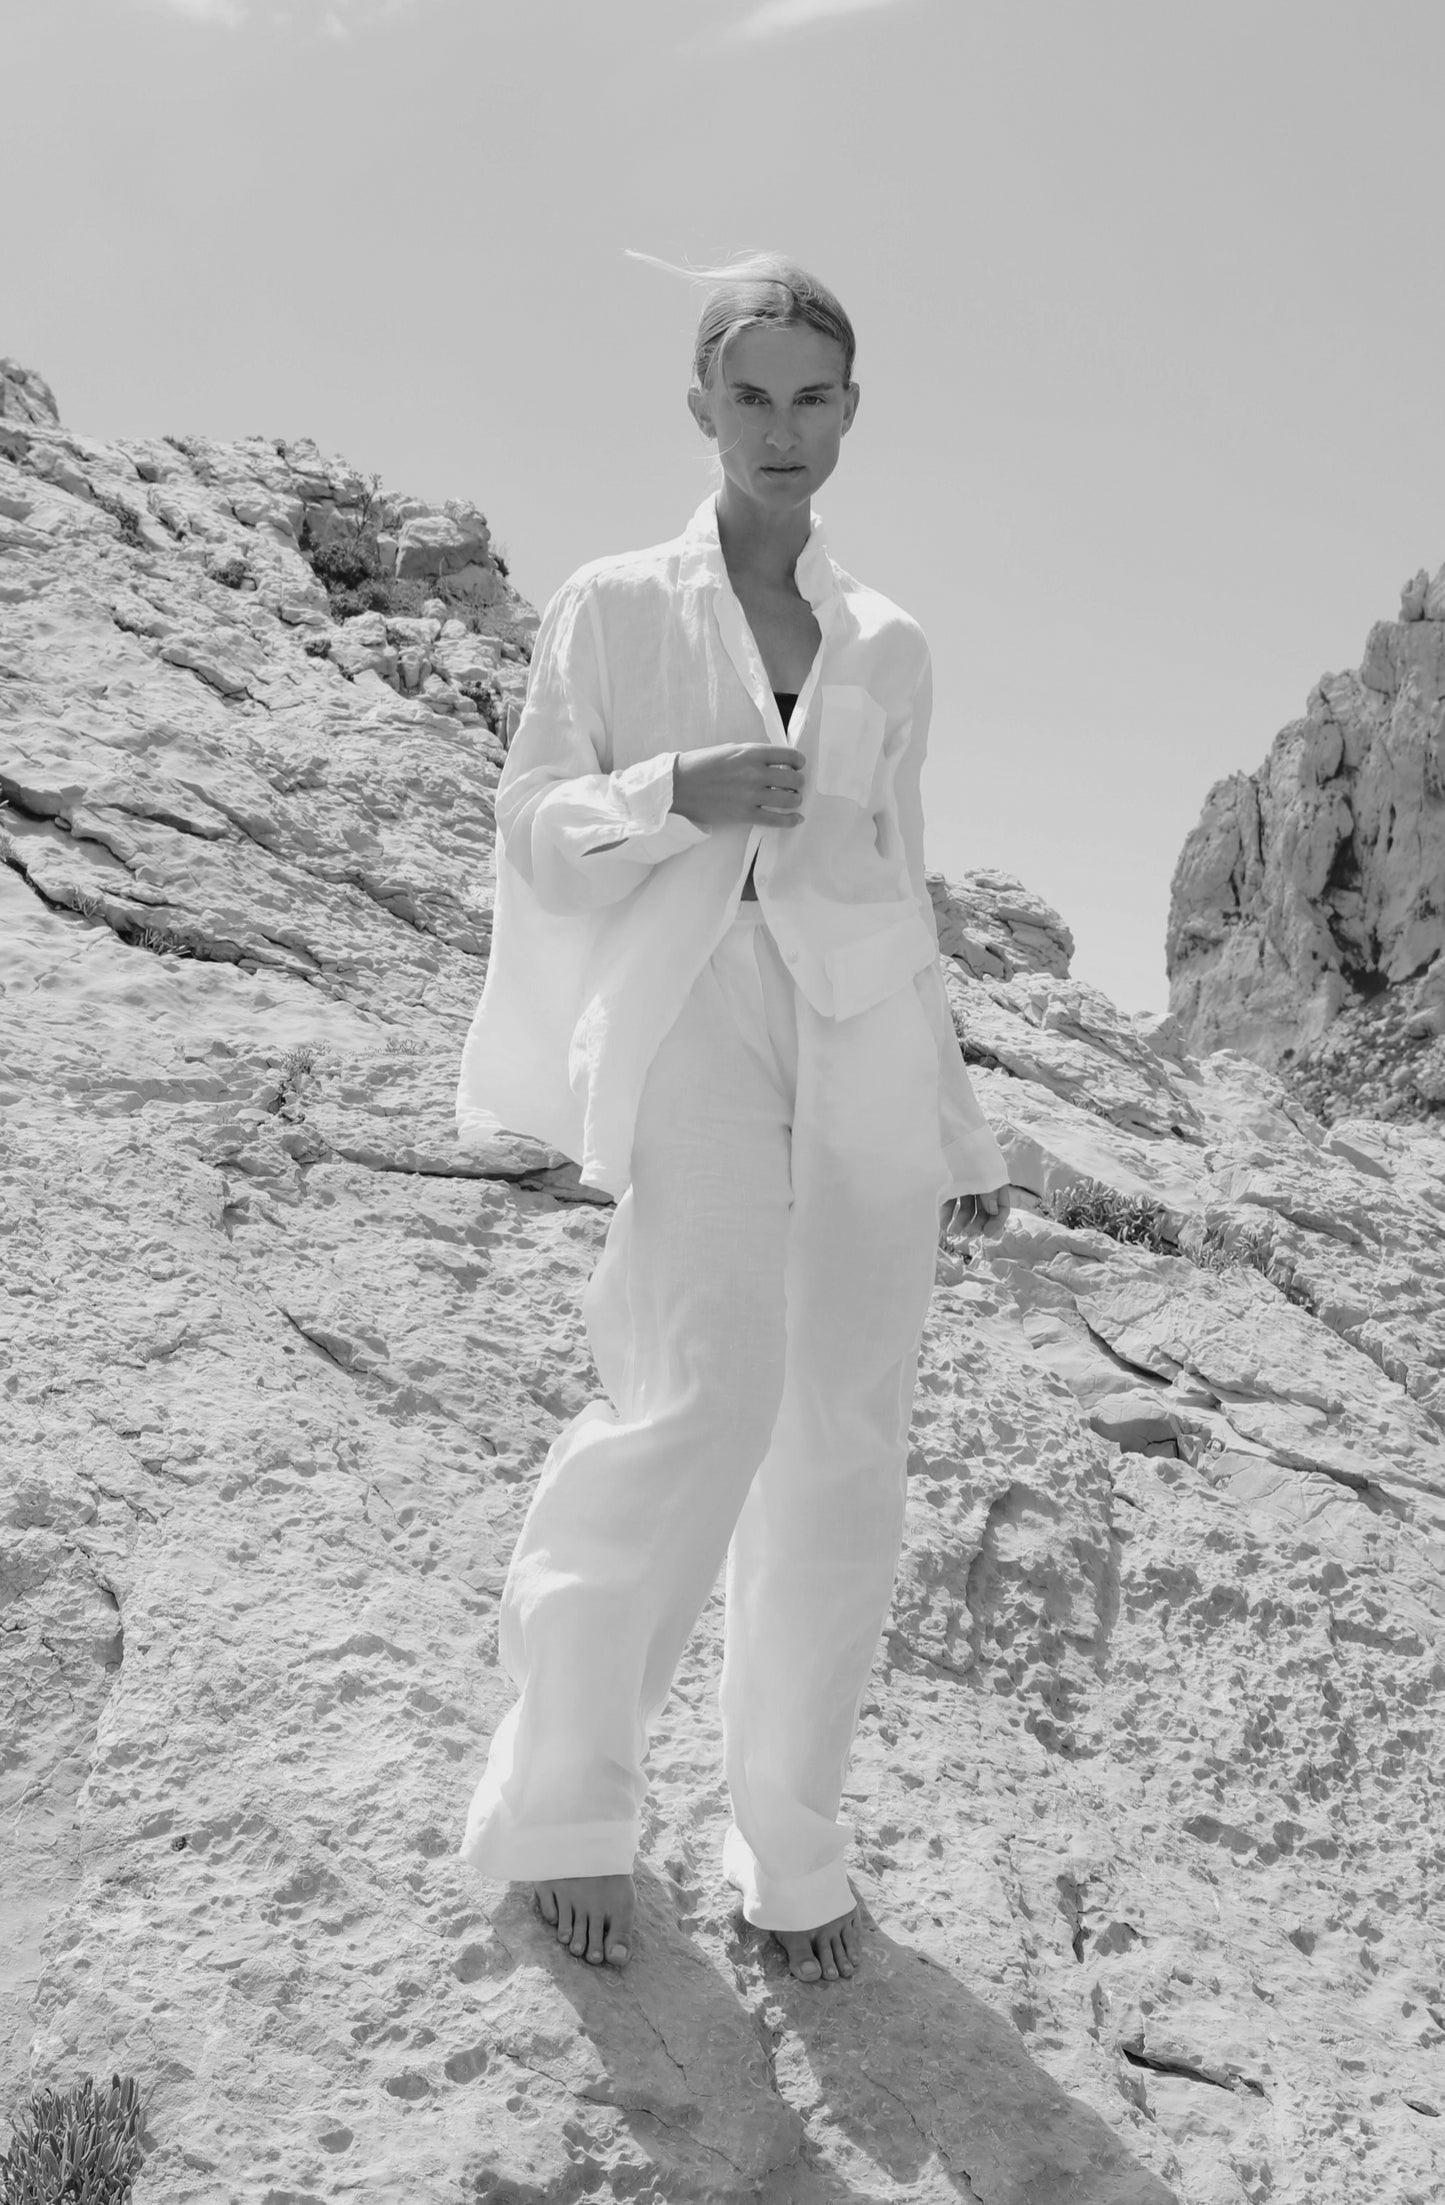 A woman in a white suit, Velvet by Jenny Graham's PICO PANT, standing on a rock.-26829926629569